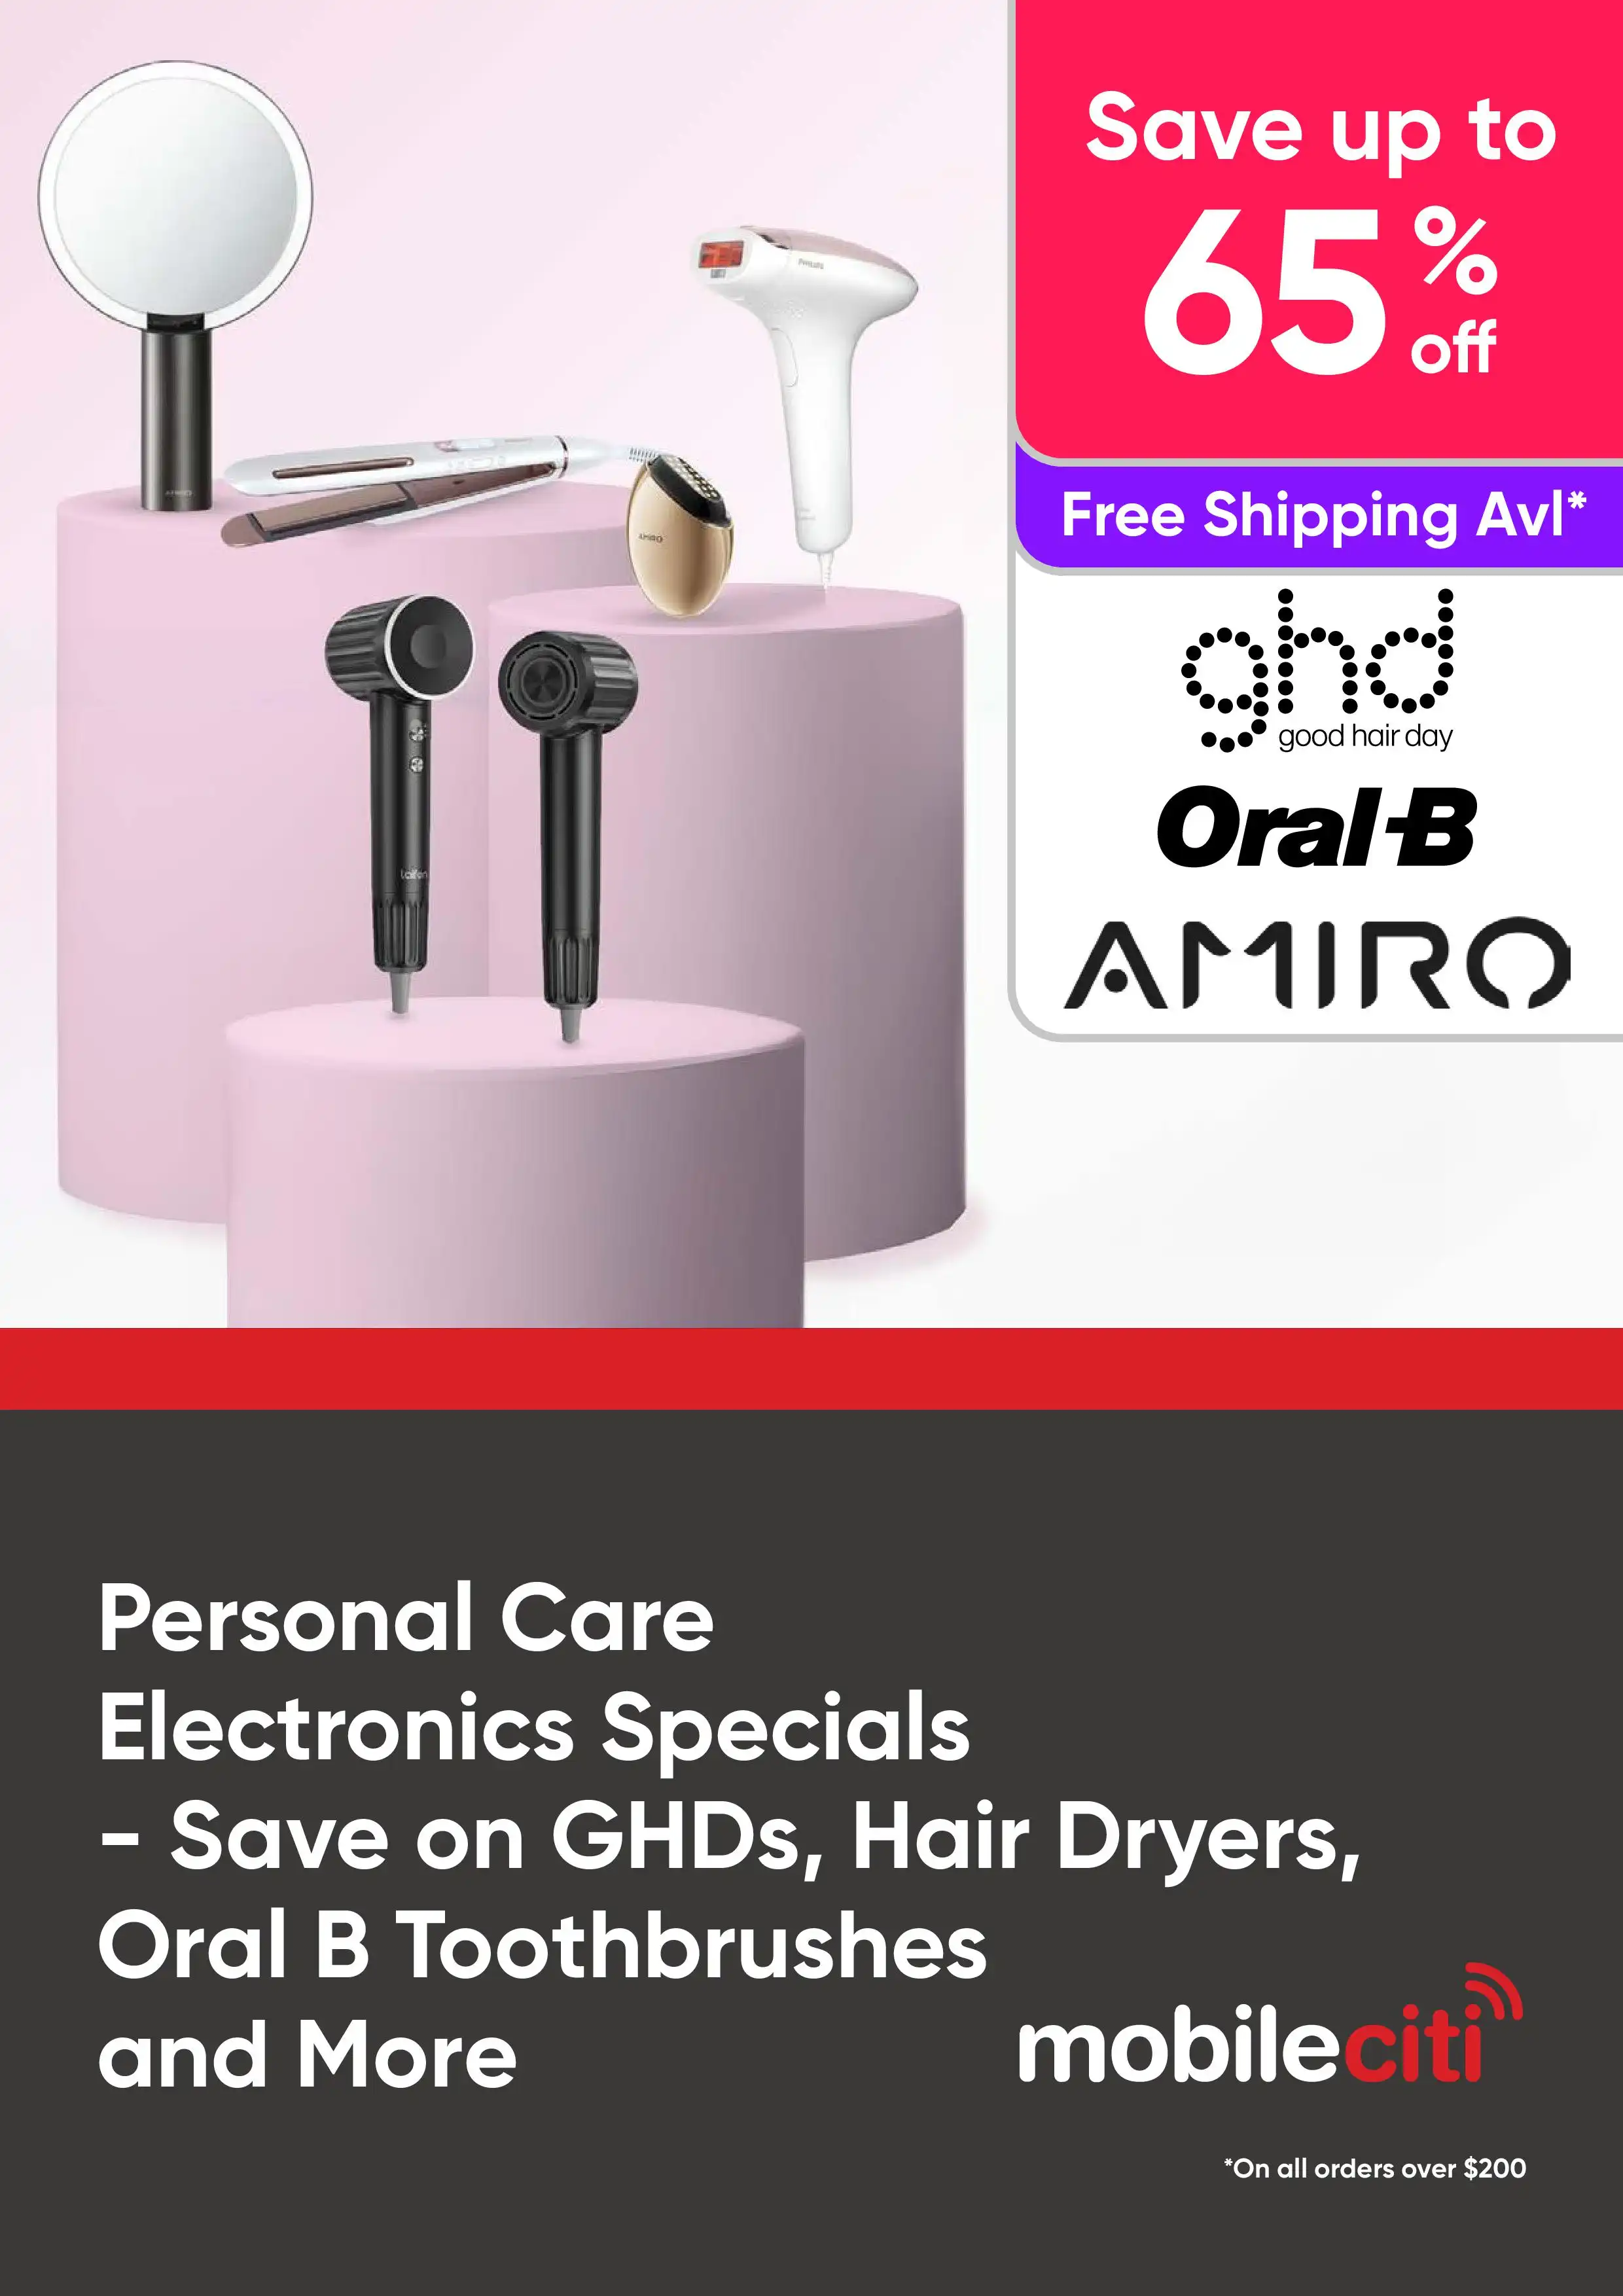 Personal Care Electronics Specials - Save Up to 40% Off GHDs, Hair Fryers, Oral B Toothbrushes and More